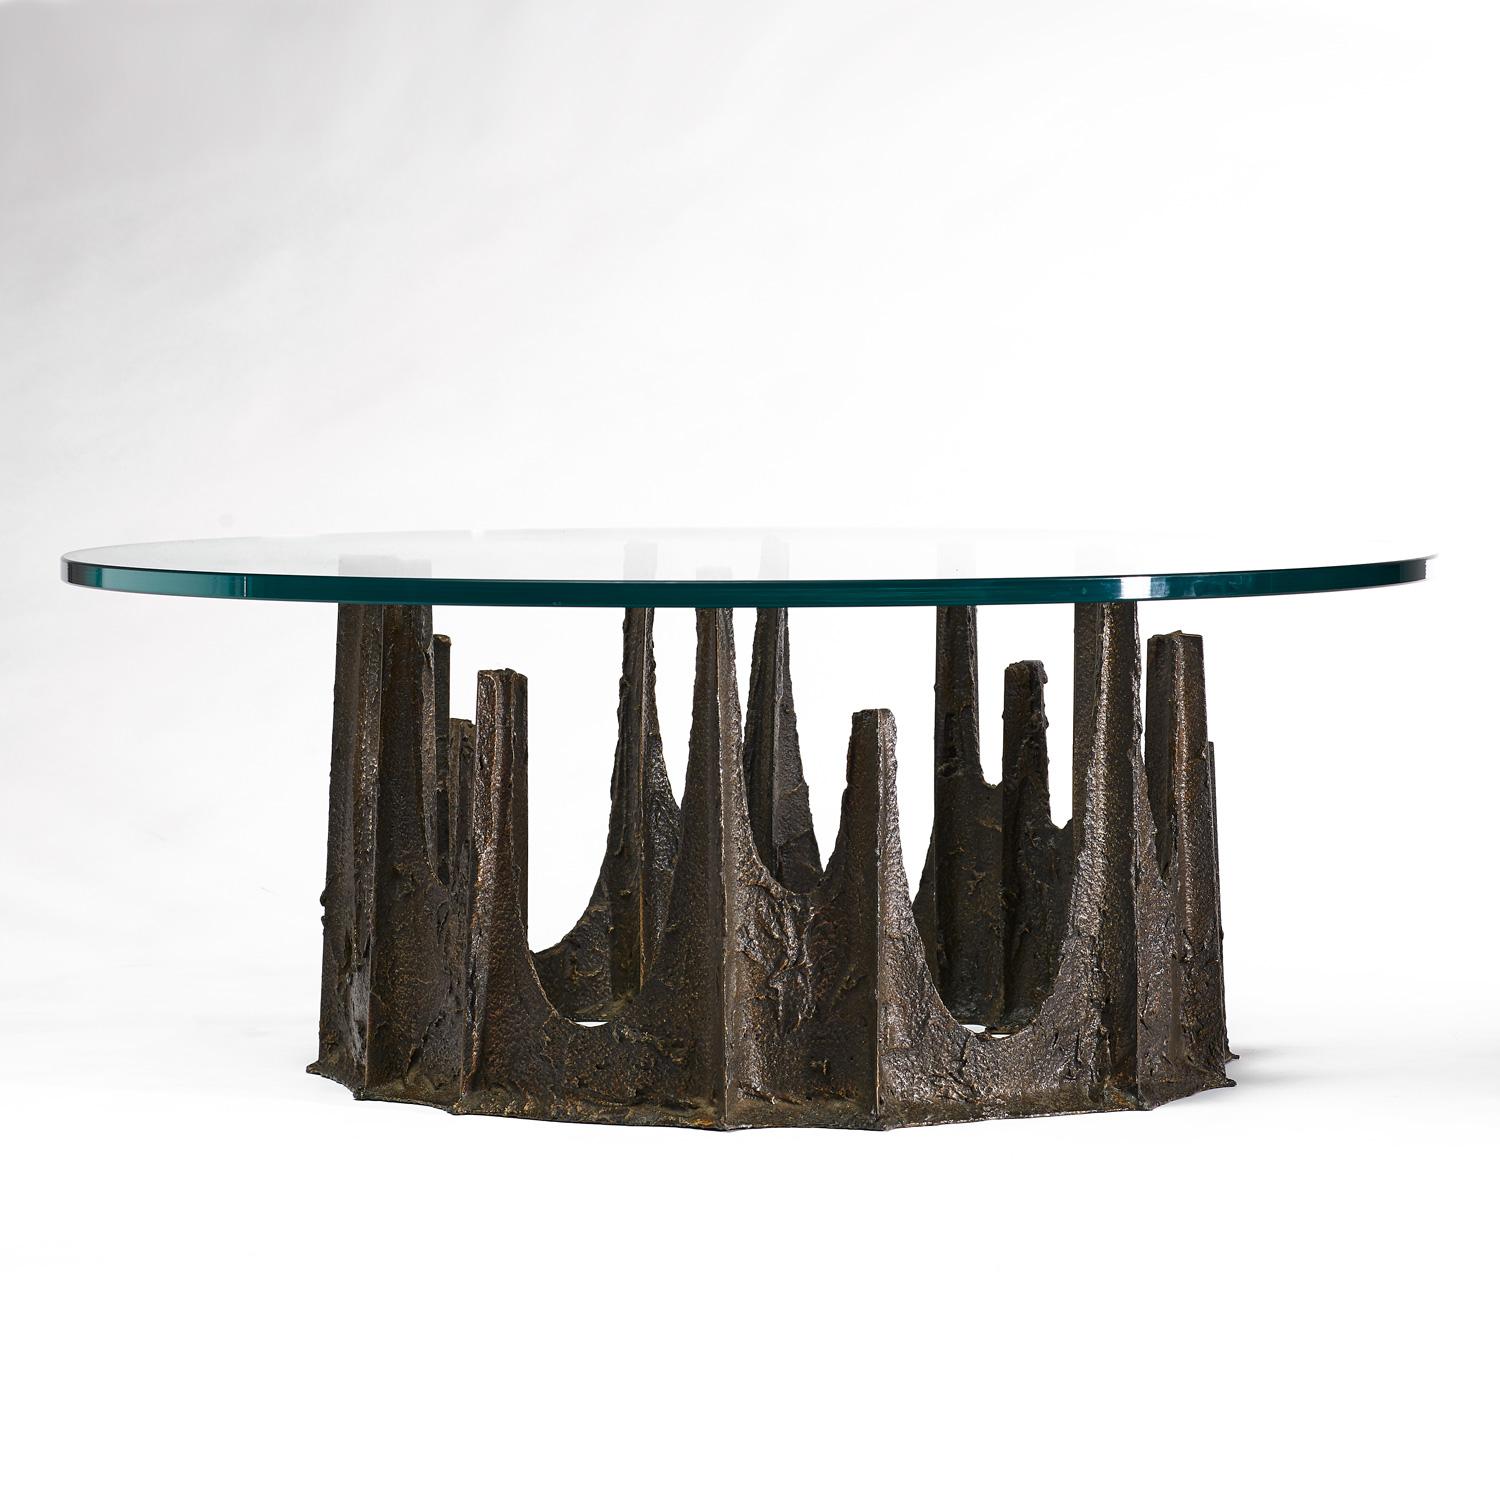 Outstanding vintage coffee table by celebrated American designer, Paul Evans. Signed and dated (1973) the sculpted metal table resembles a stalagmite. Evans expertise in metallurgy is evident as he transformed the typical aesthetic of the metal in